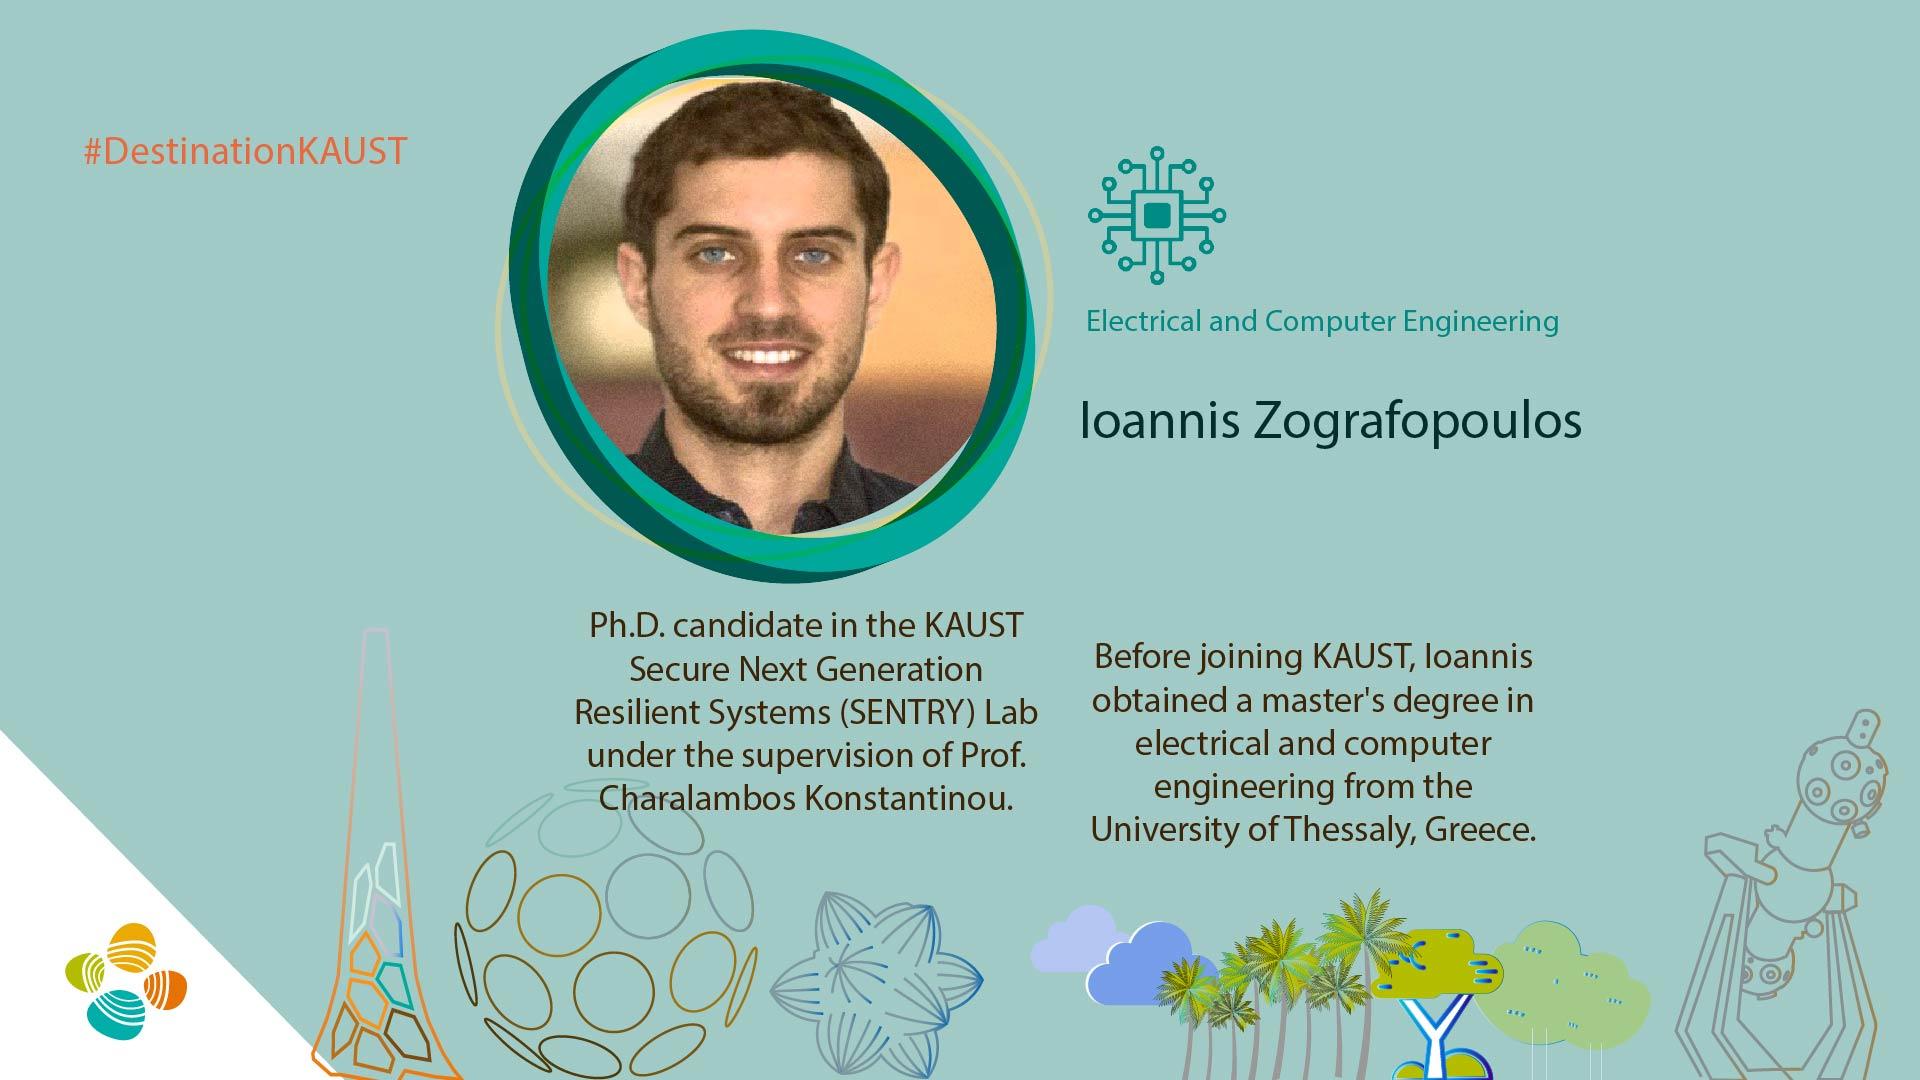 KAUST CEMSE ECE SENTRY Ioannis Zografopoulos